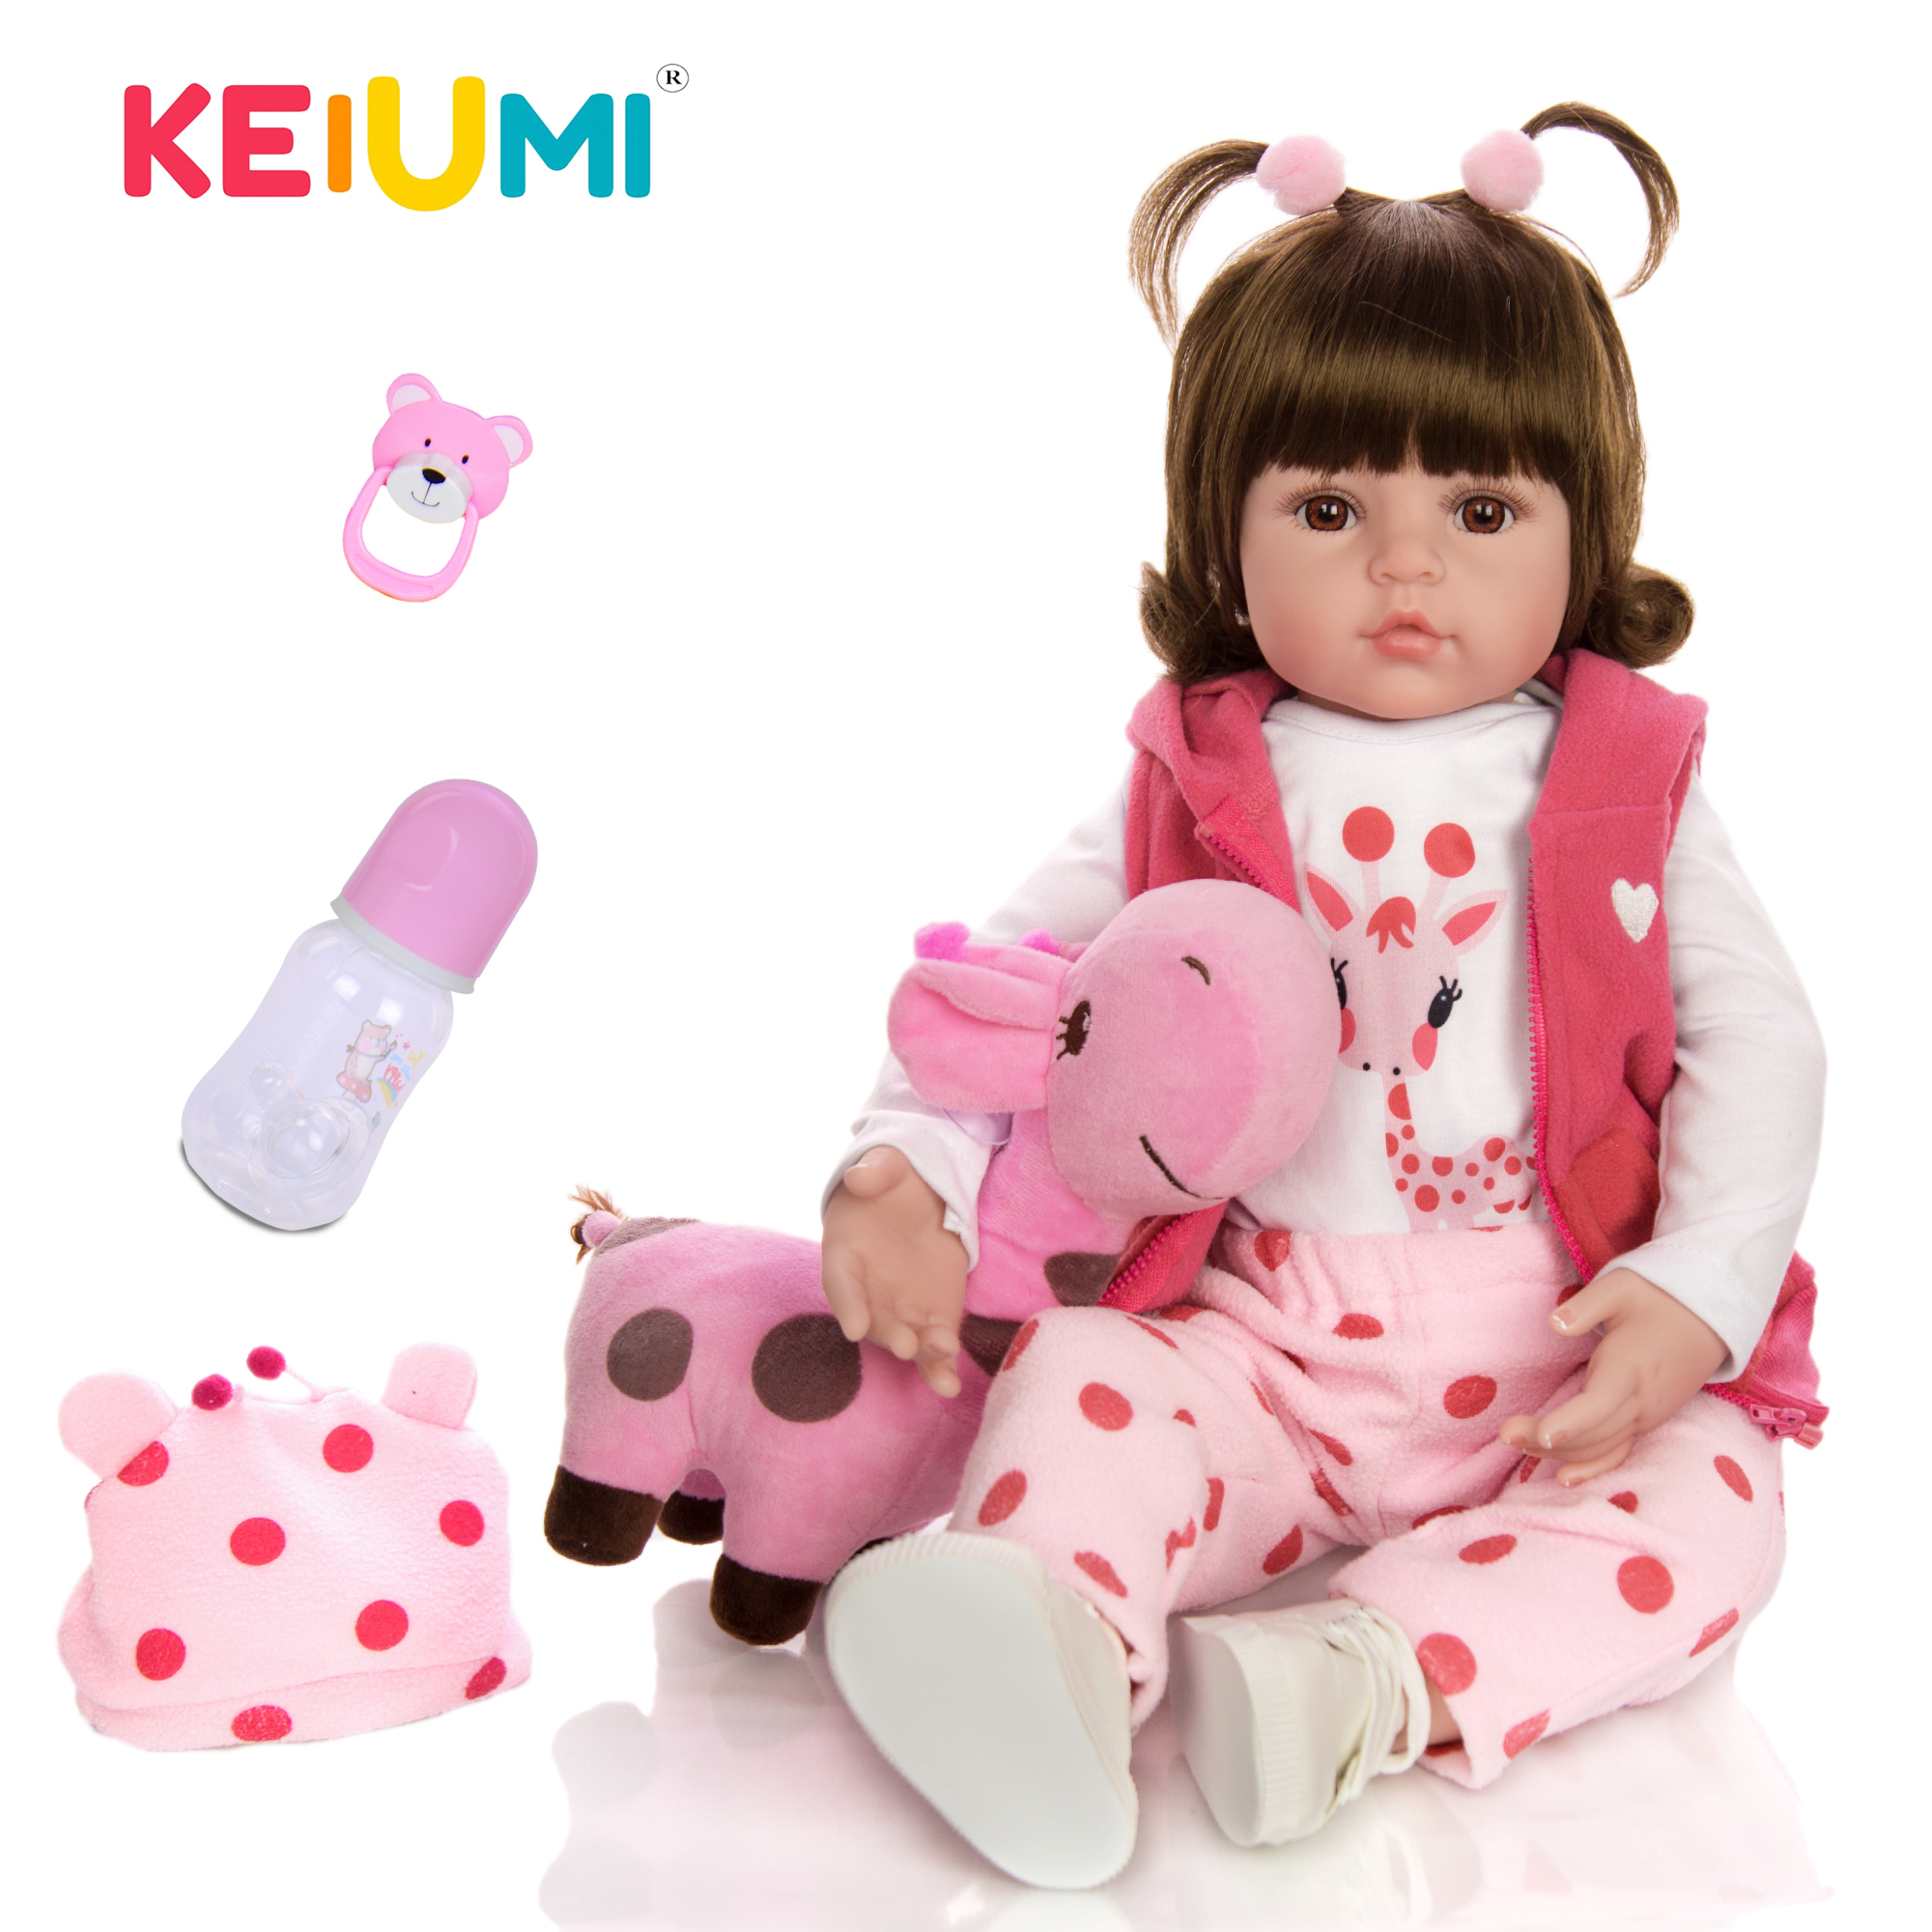 KEIUMI Hot Sale Reborn Baby Doll Toy Cloth Body Stuffed Realistic Baby Doll With Giraffe Toddler Birthday Christmas Gifts